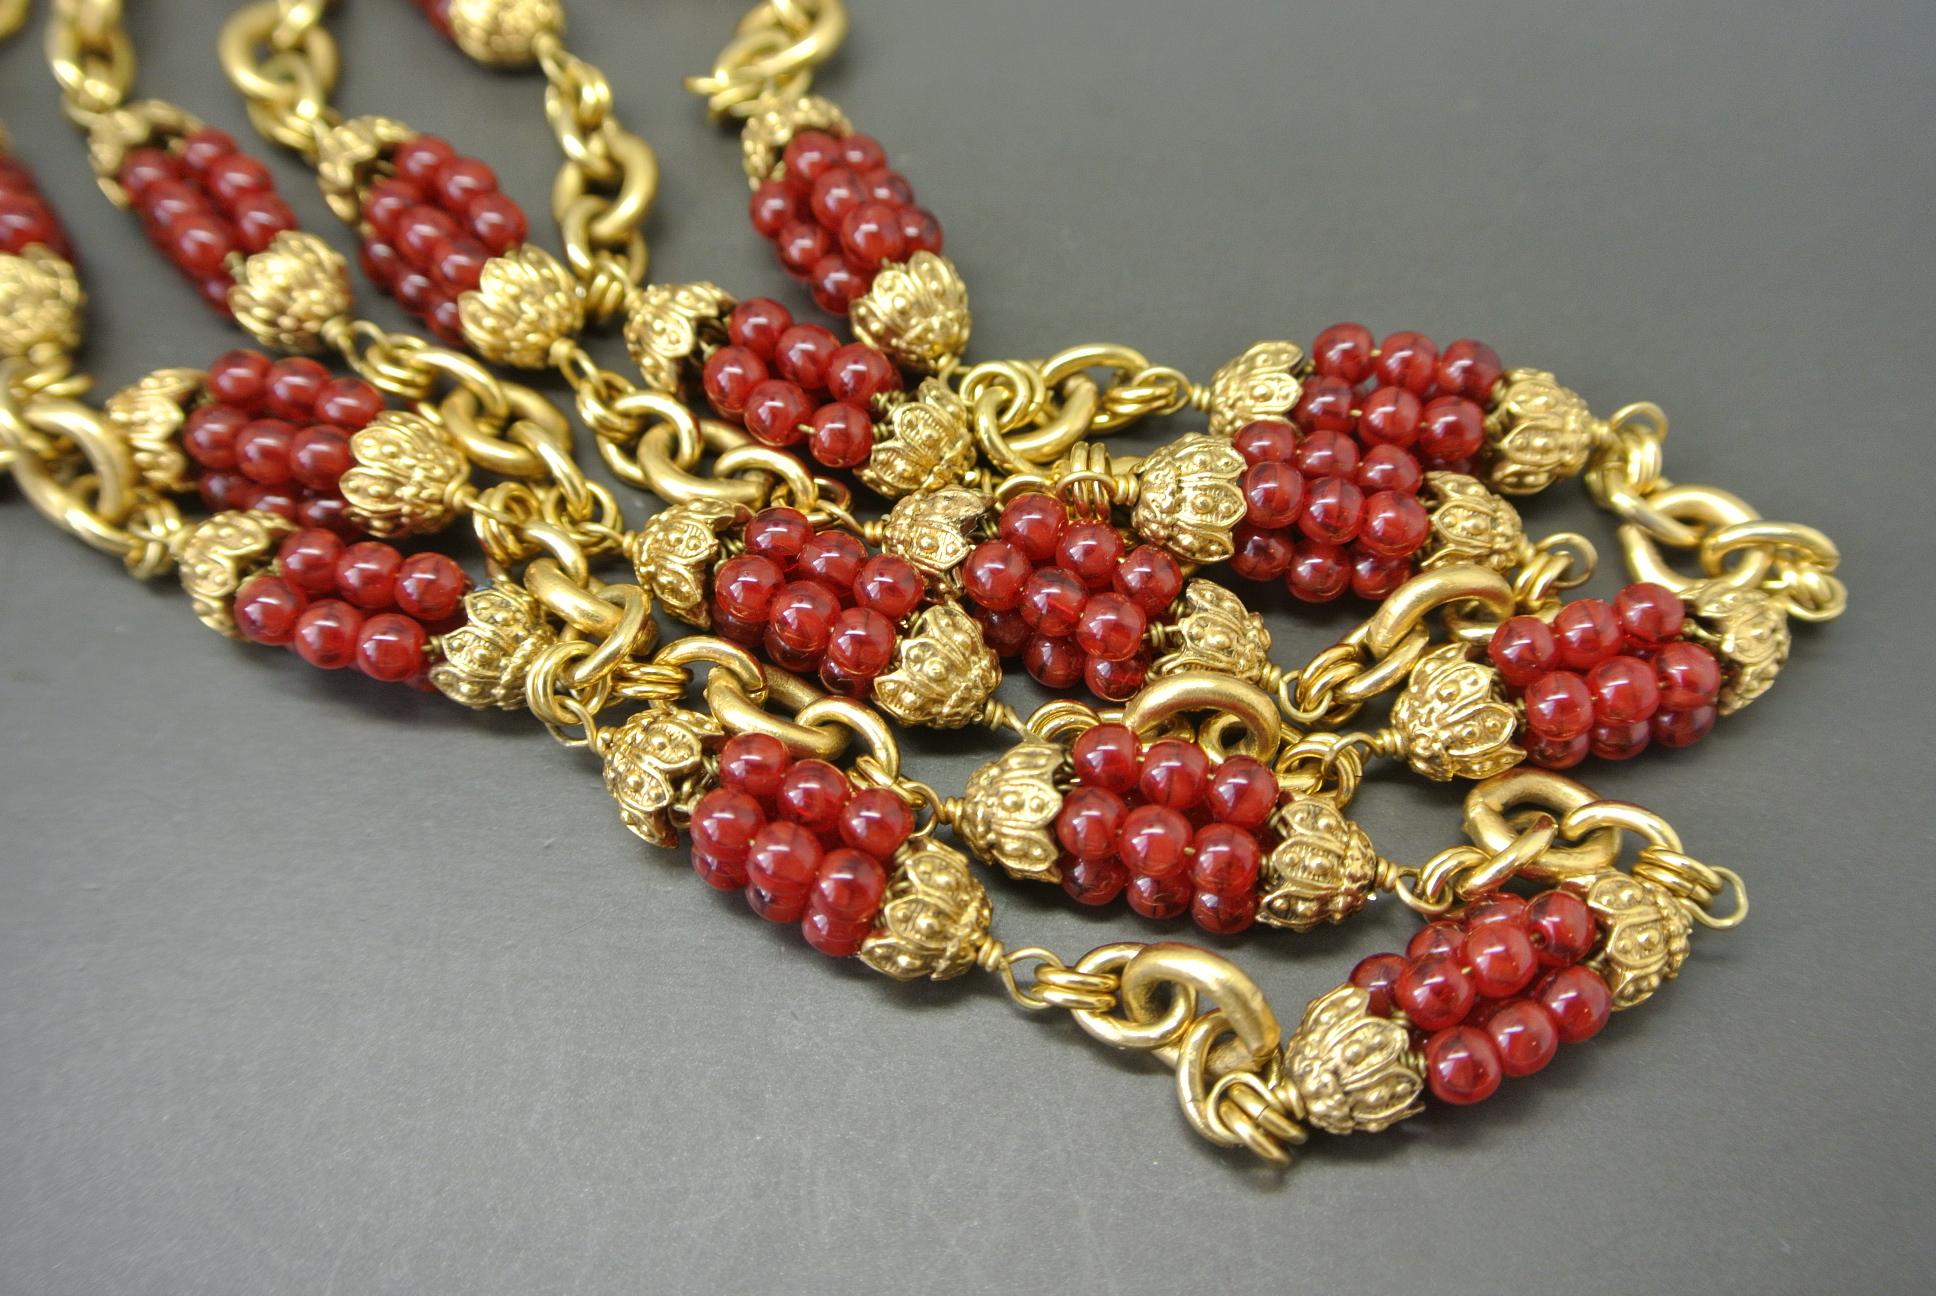 Baroque Chanel 1960s by Goossens Red Gripoix Beads Filigree Sautoir Necklace For Sale